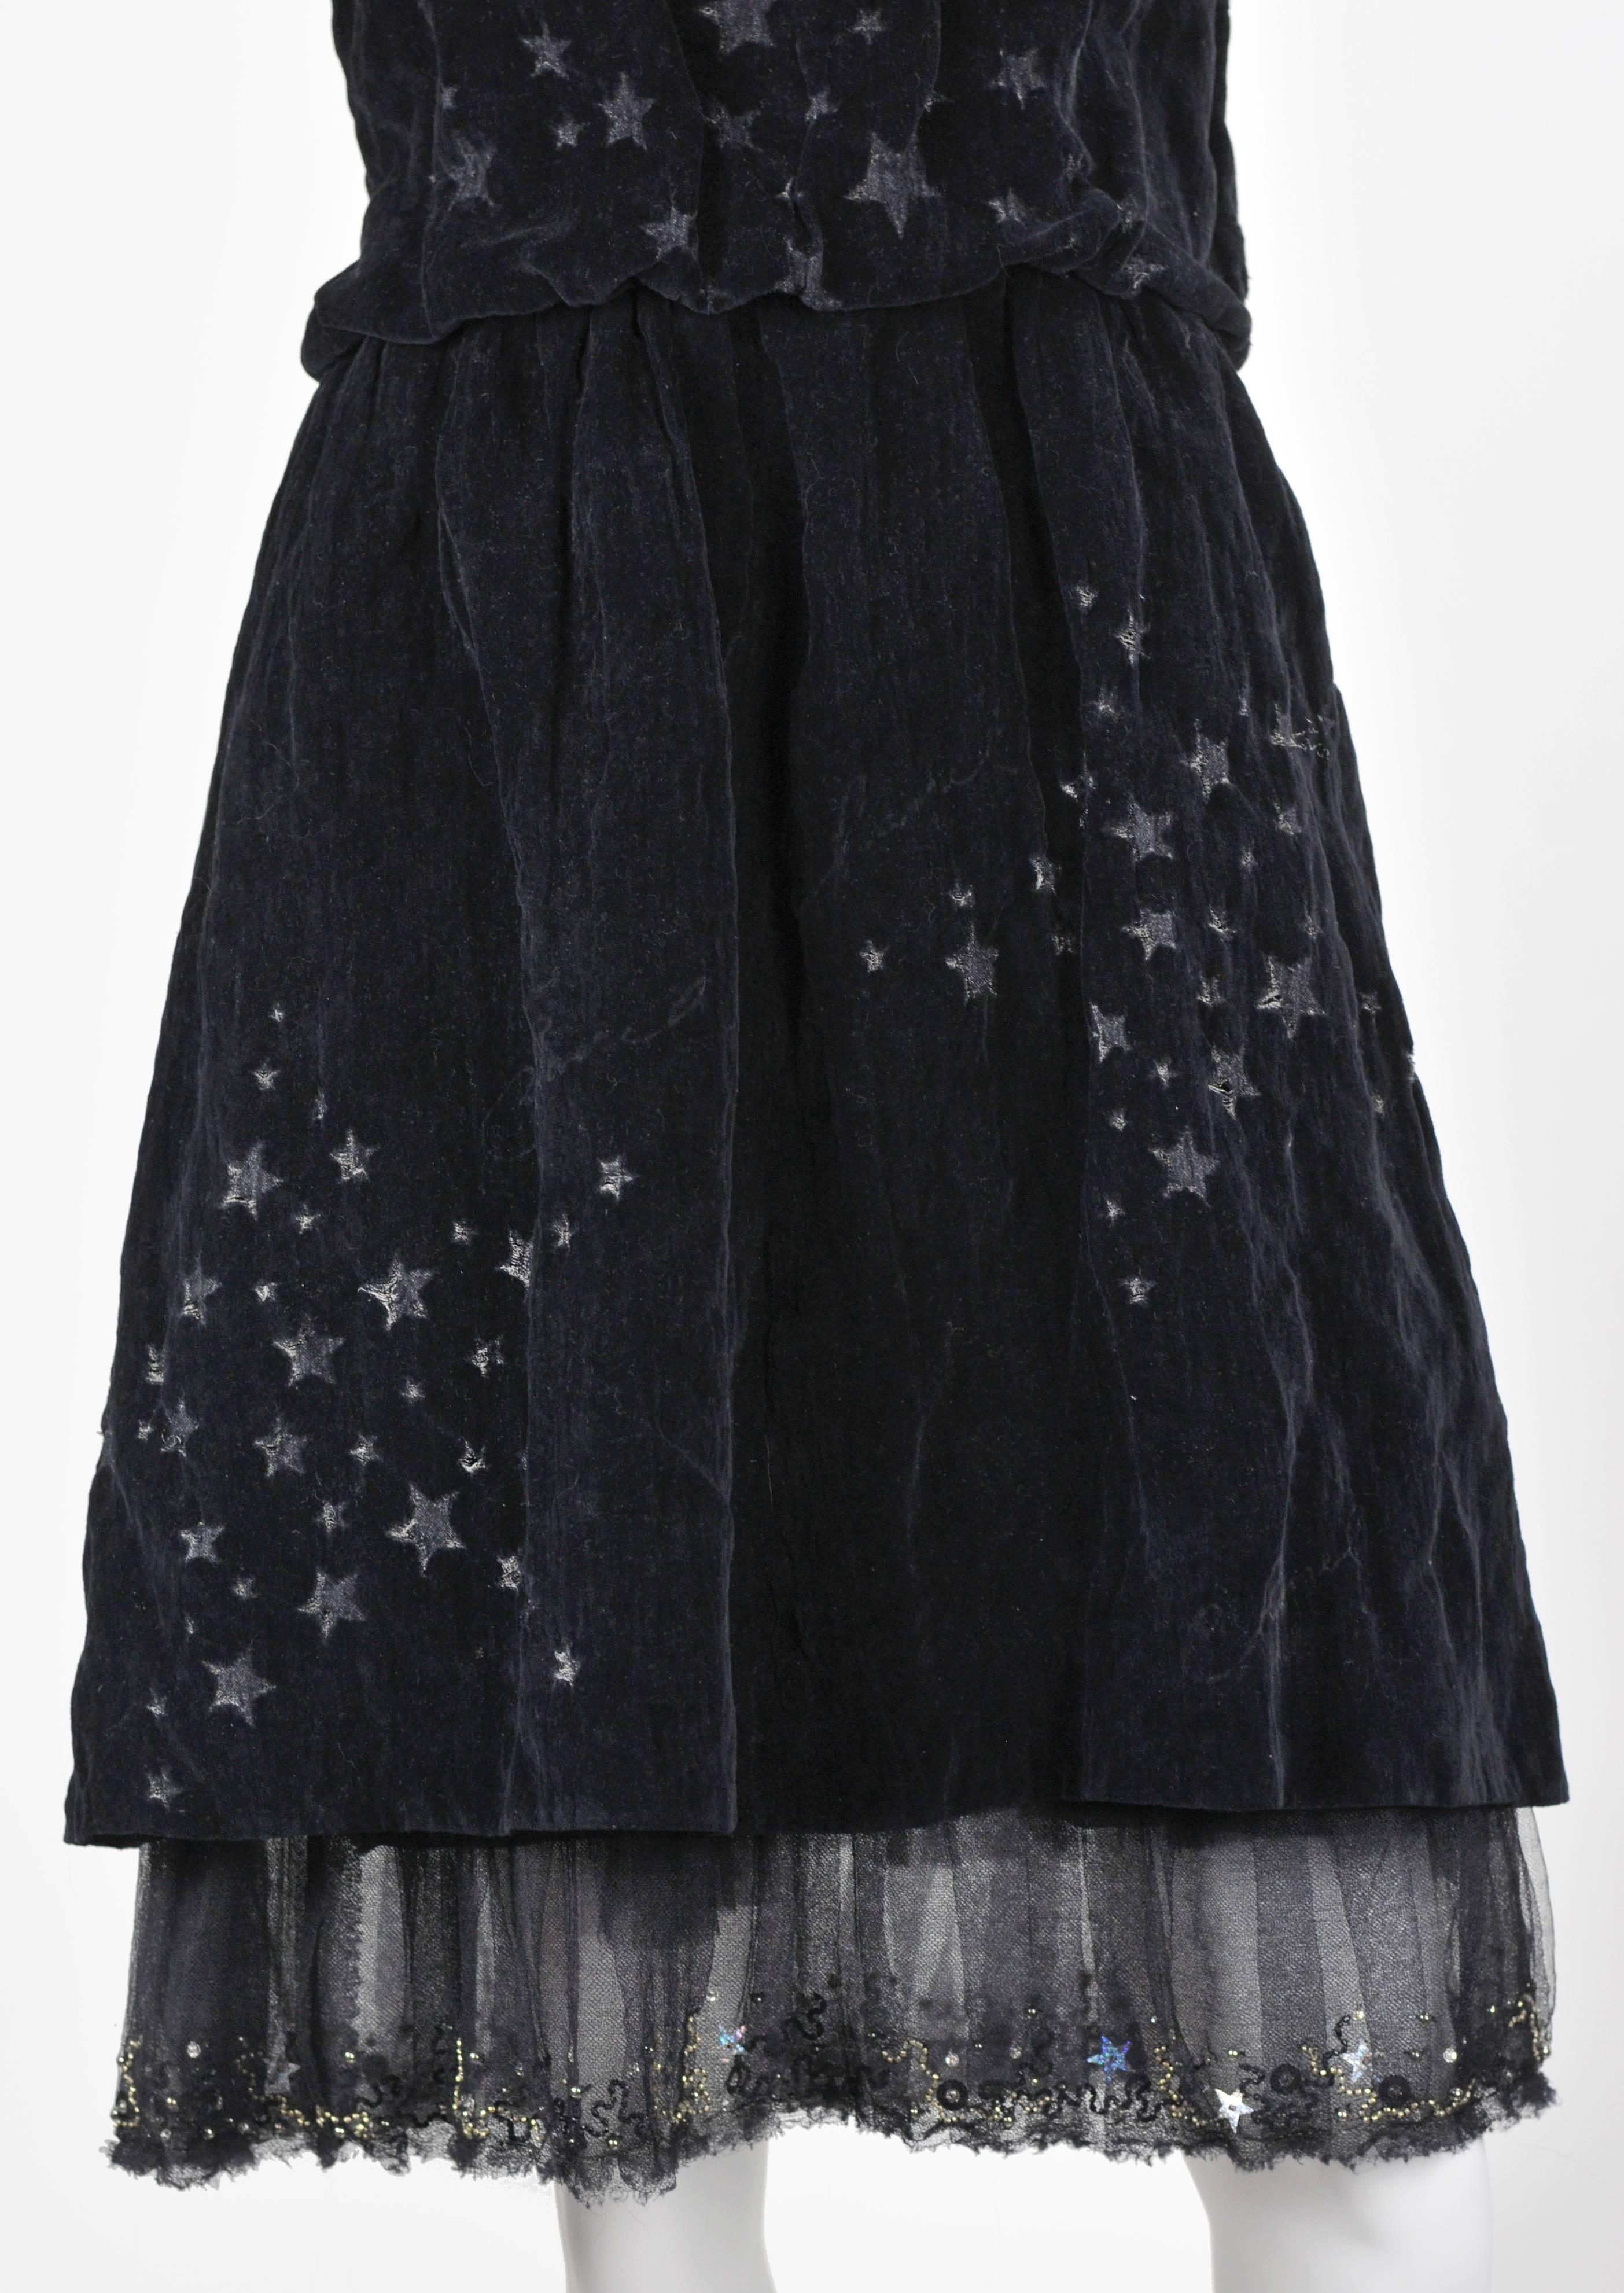 Chanel 2007A Demi Couture  Black Velvet Evening Dress w/ Beading and Stars FR 34 For Sale 5